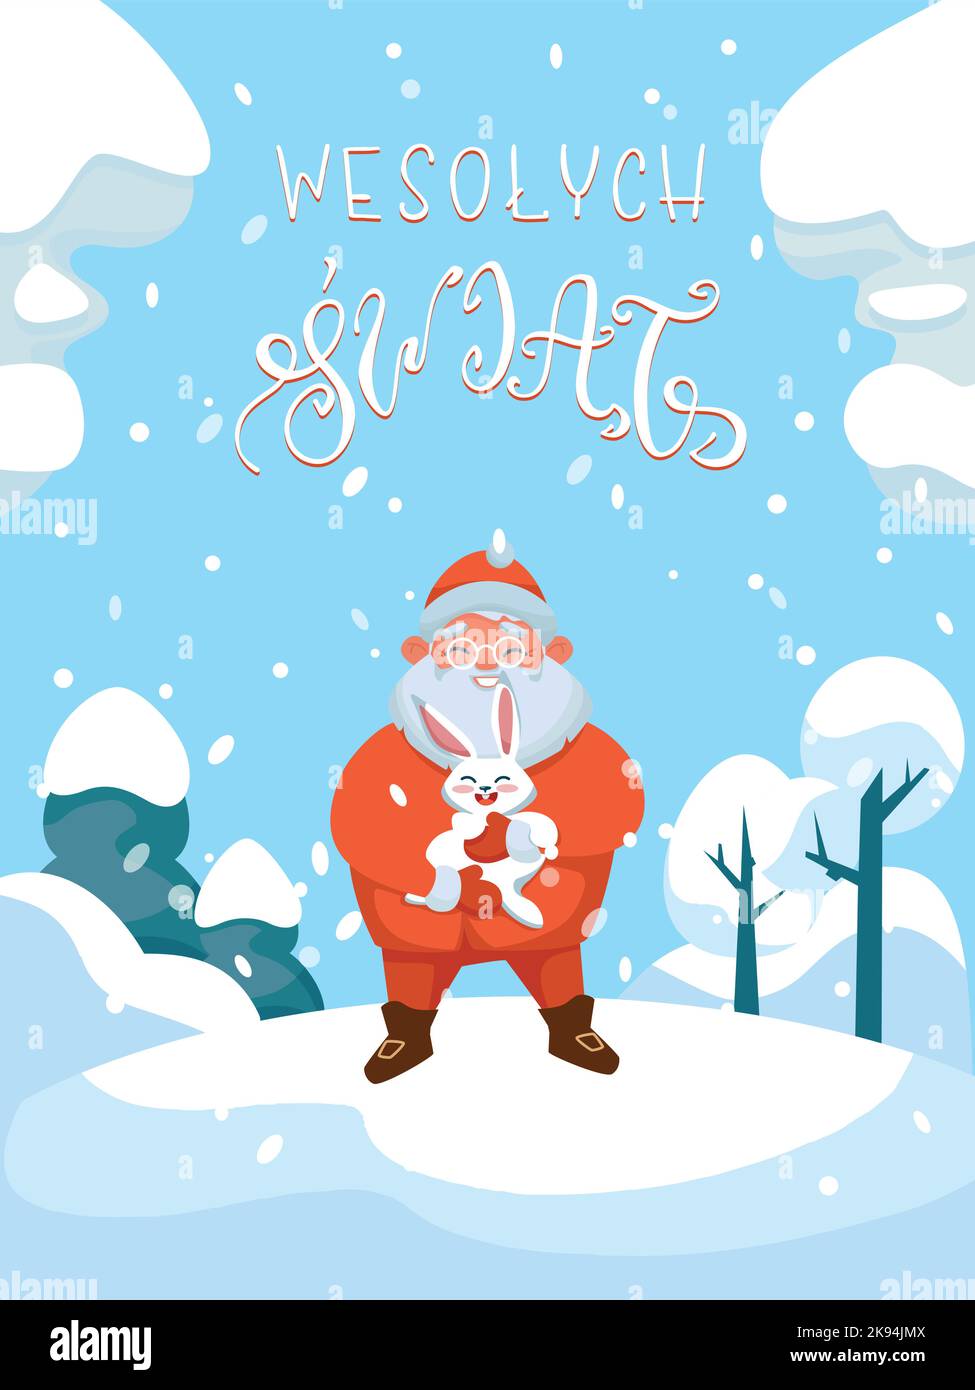 Wesolych Swiat Polish Greeting Card for Holidays Stock Vector